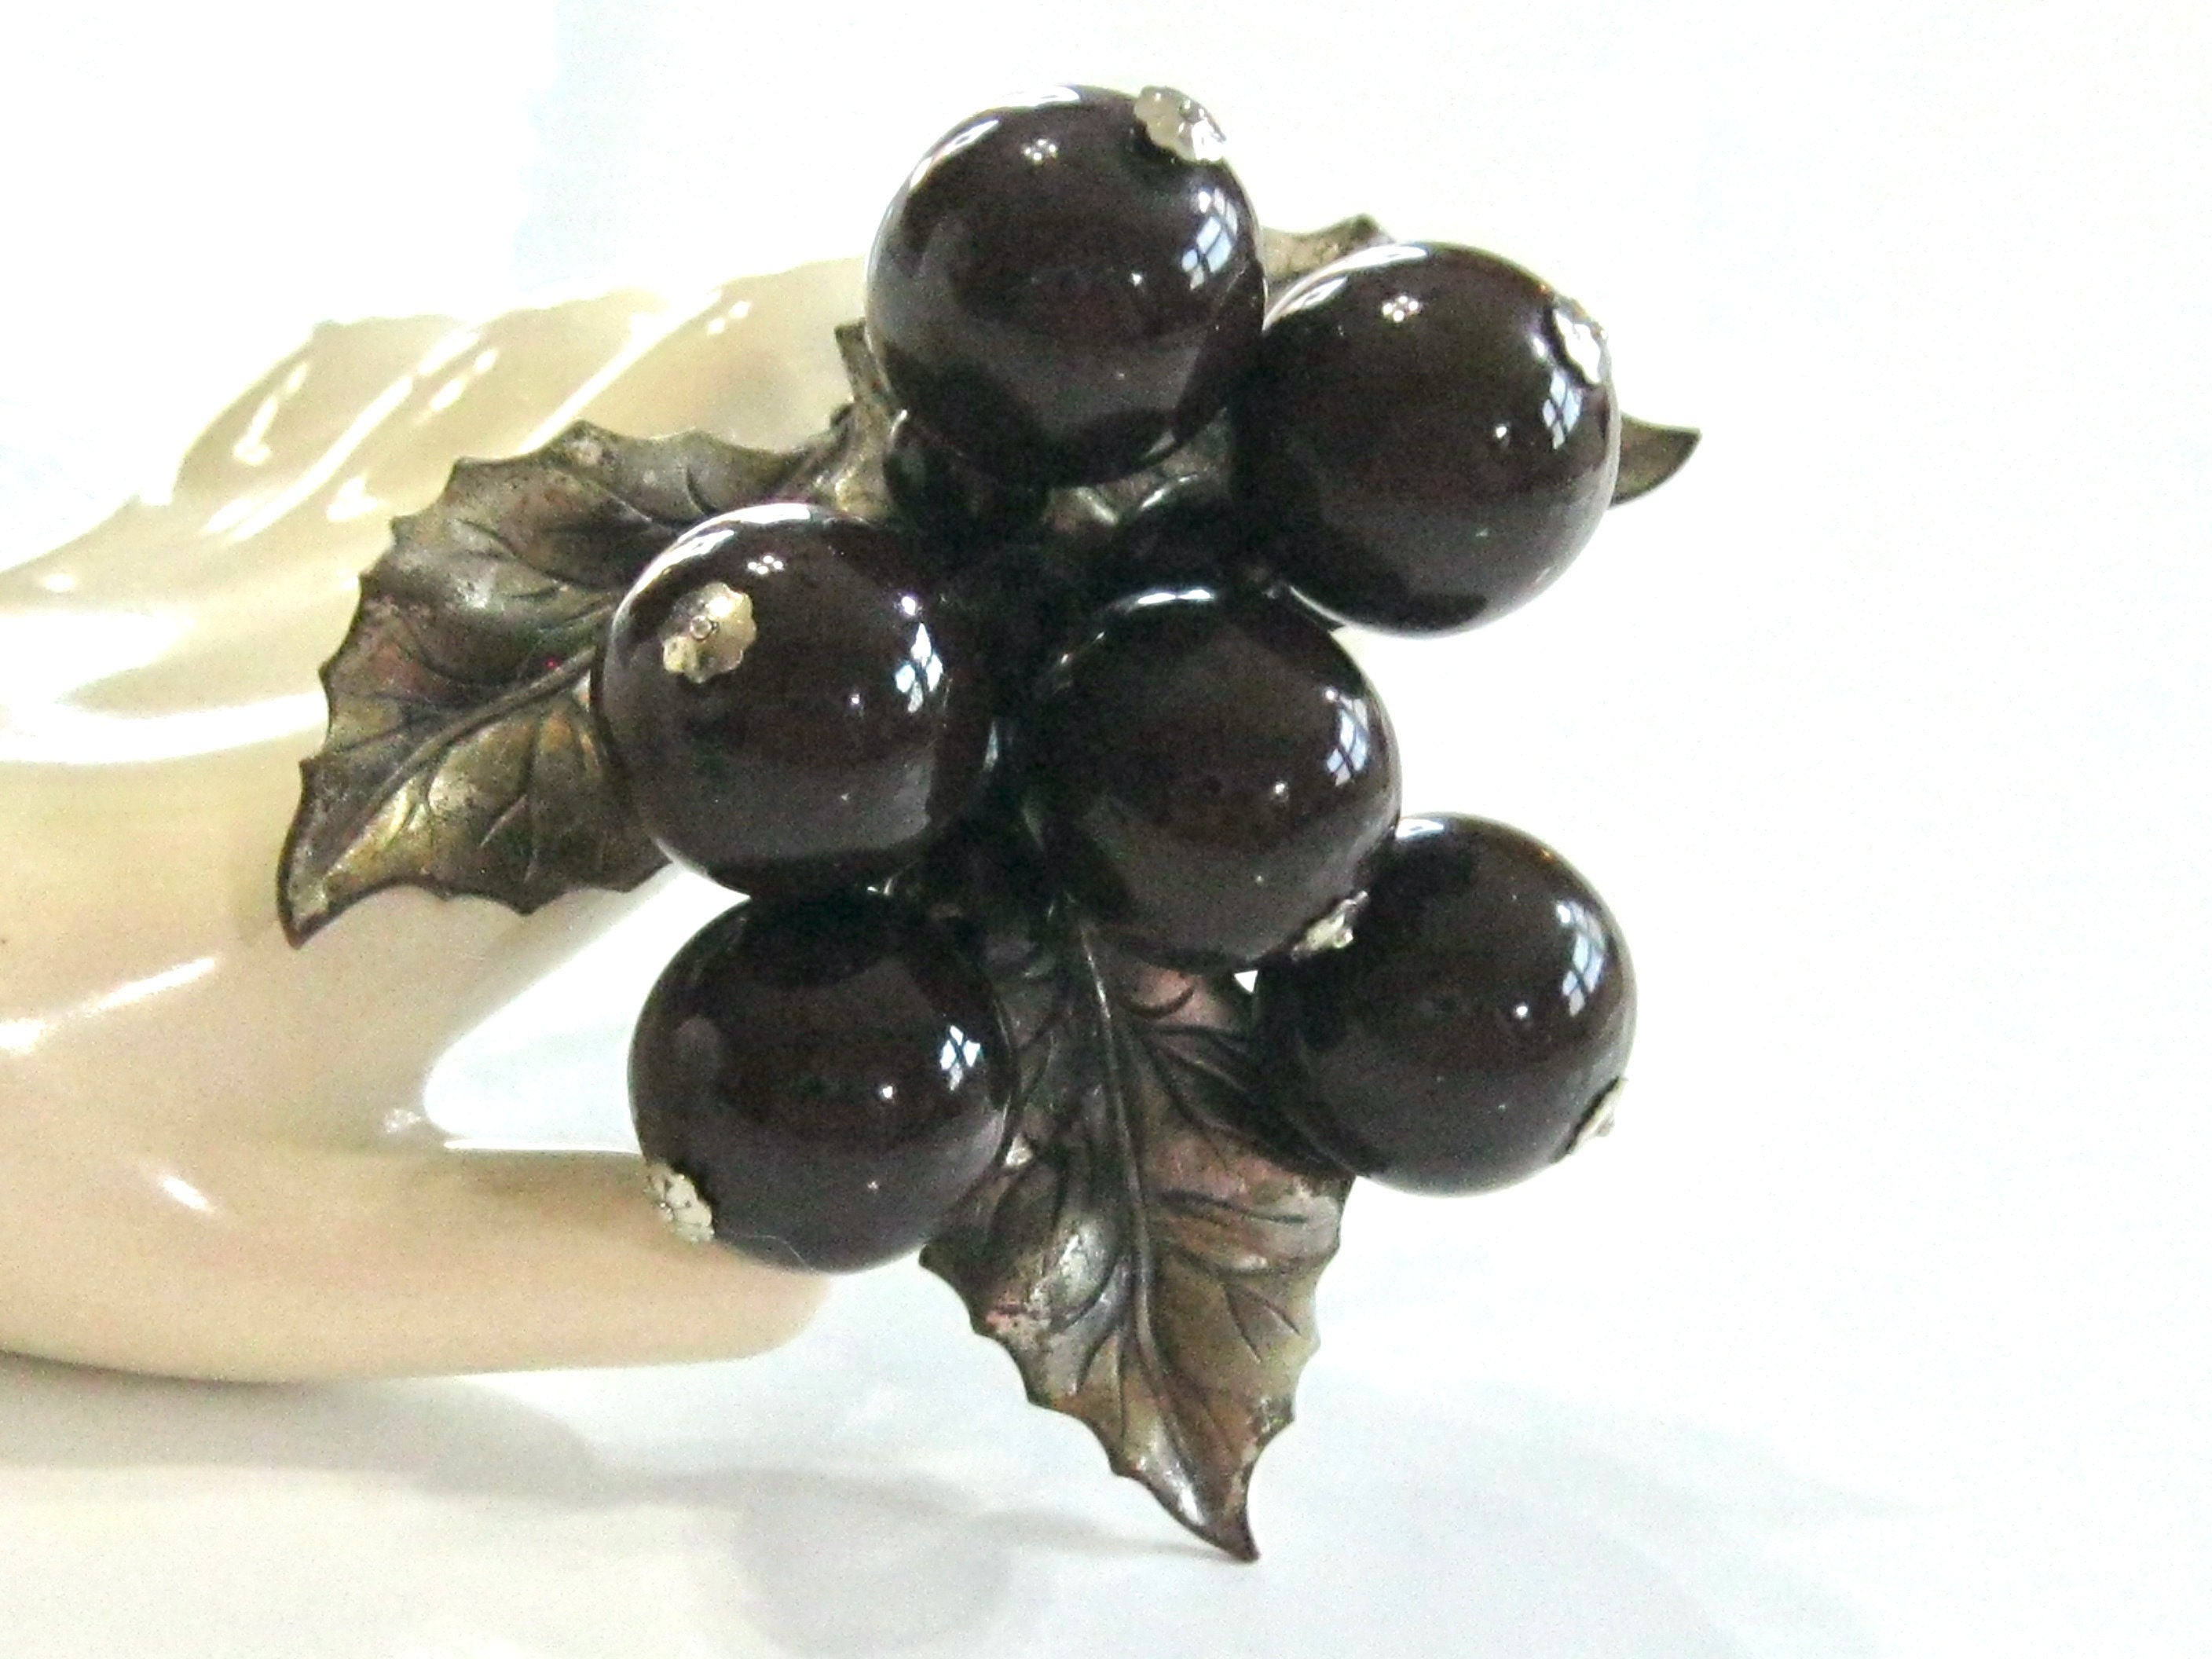 10 Inch Holly Berry Picks With Pine Cones Set/2 for Tree 